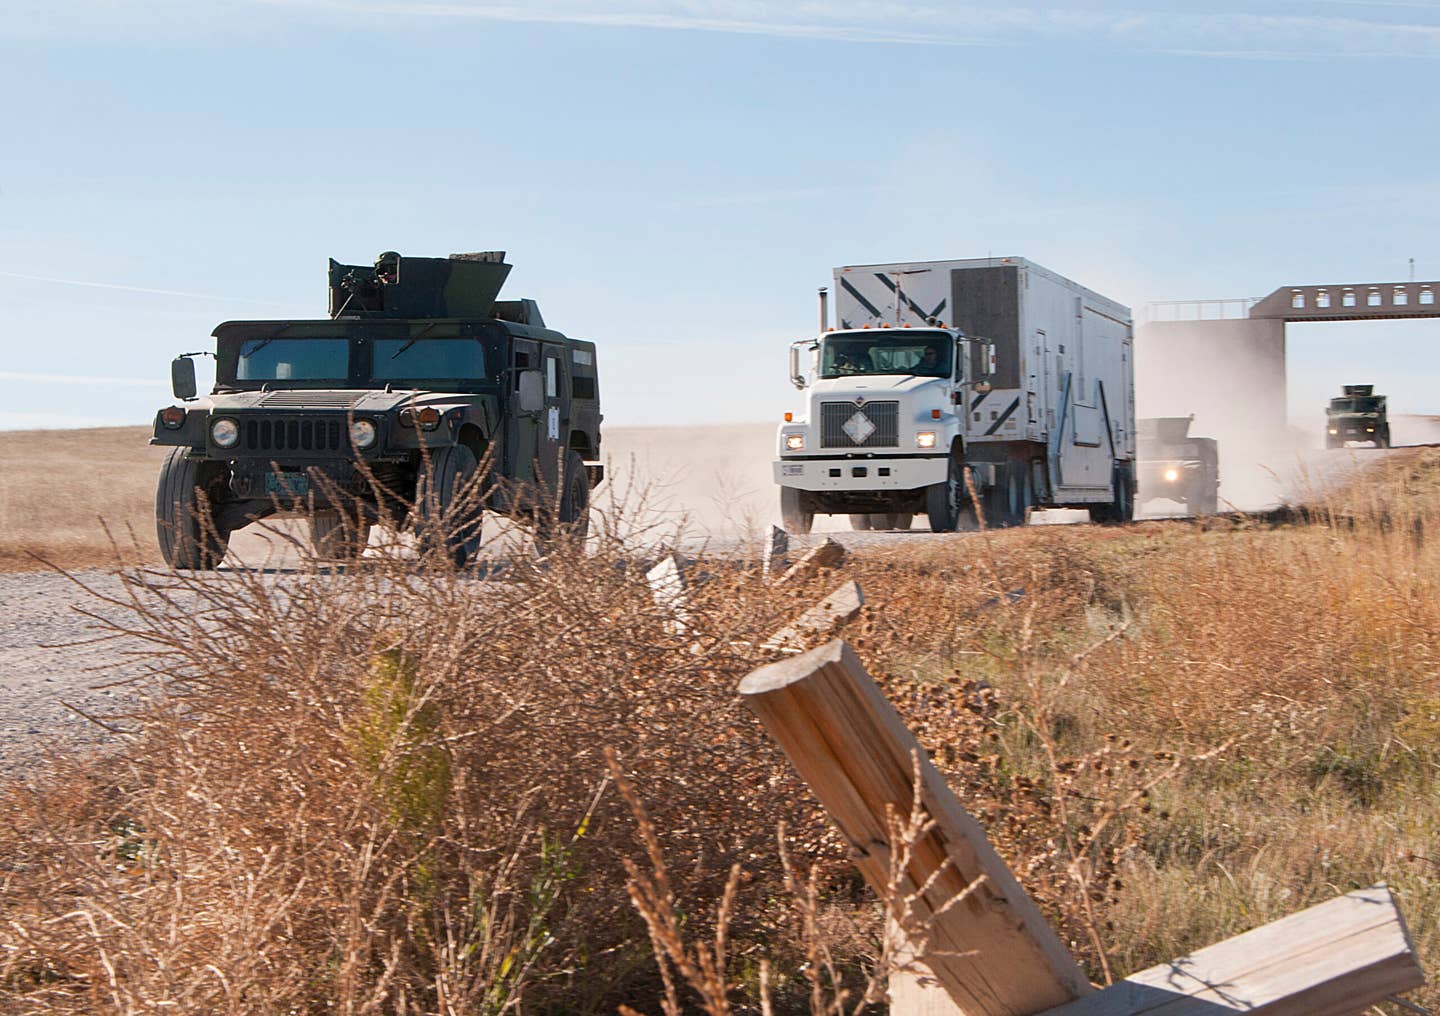 A convoy of 741st Missile Security Forces Squadron vehicles from Malmstrom Air Force Base, Montana, rolls down a dirt road during a training exercise in 2014. <em>U.S. Air Force photo by Senior Airman Jason Wiese</em>